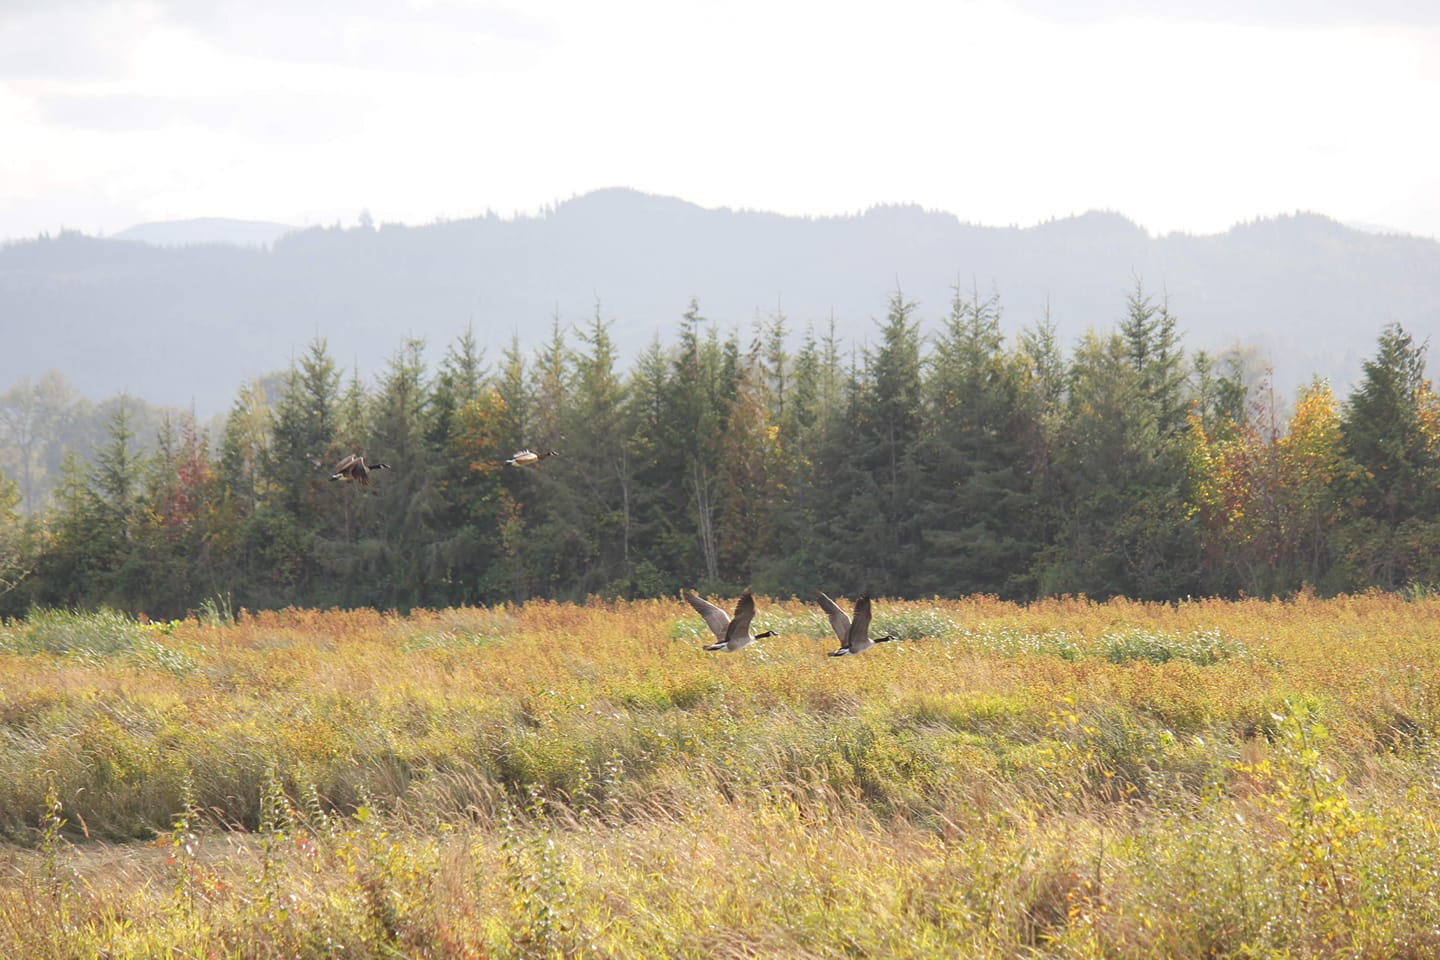 Grey, black, and white birds fly across a field of golden grasses backed by evergreen trees.